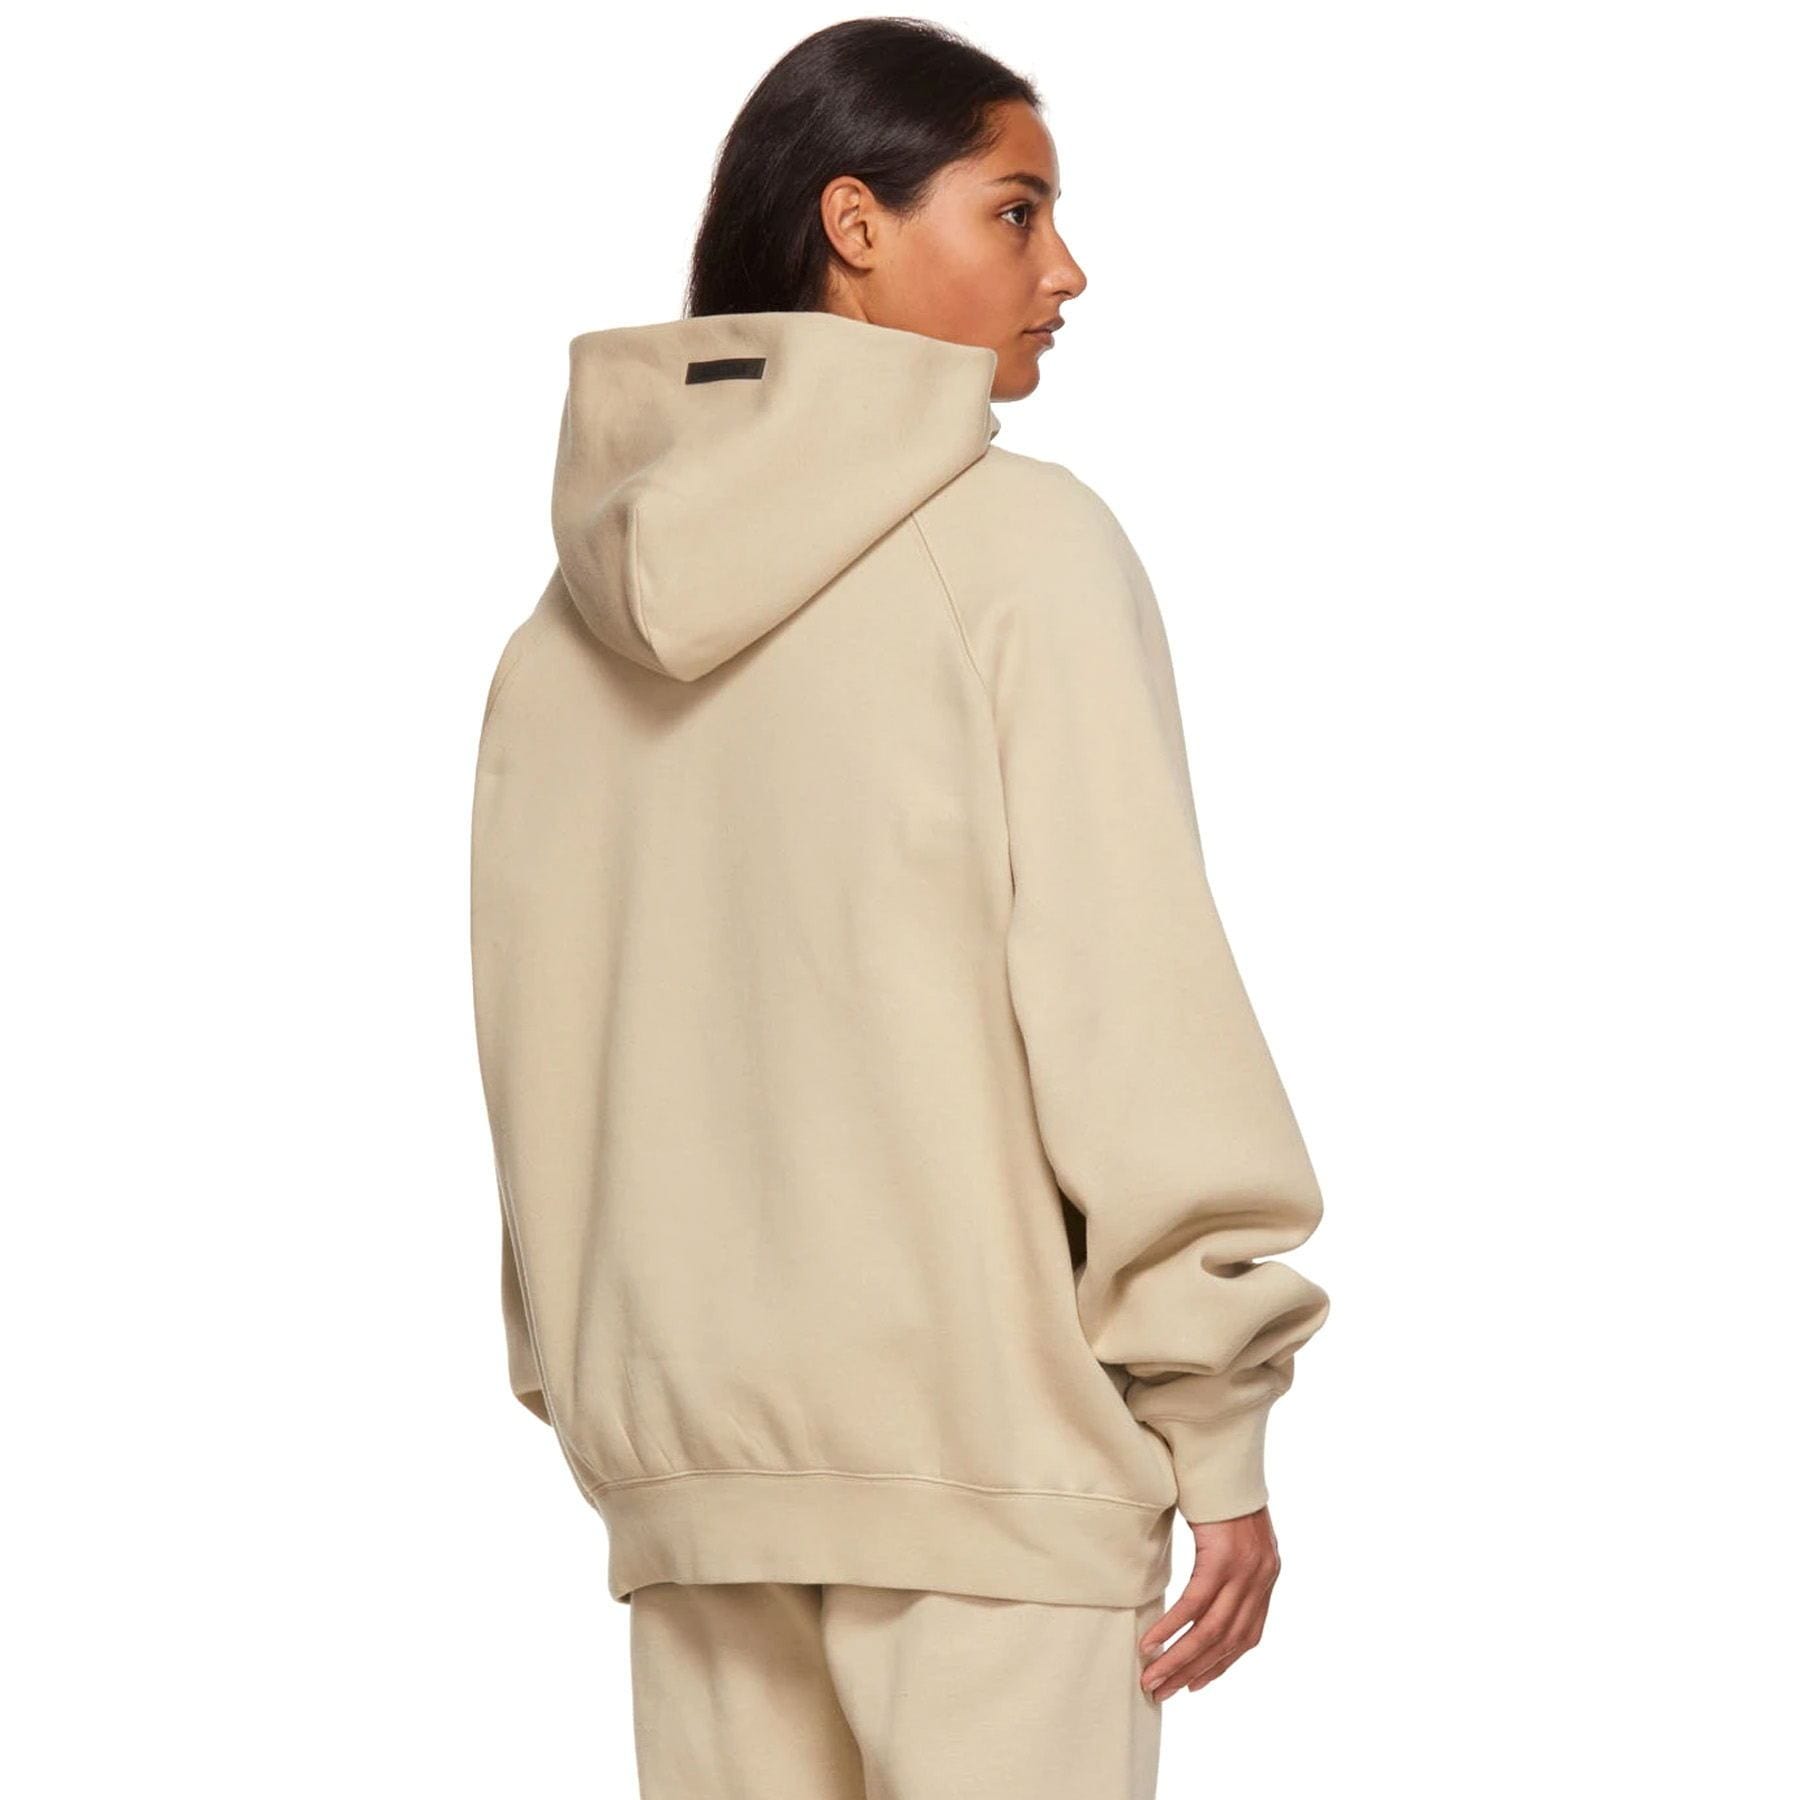 Taupe Cotton Hoodie by Fear of God ESSENTIALS on Sale